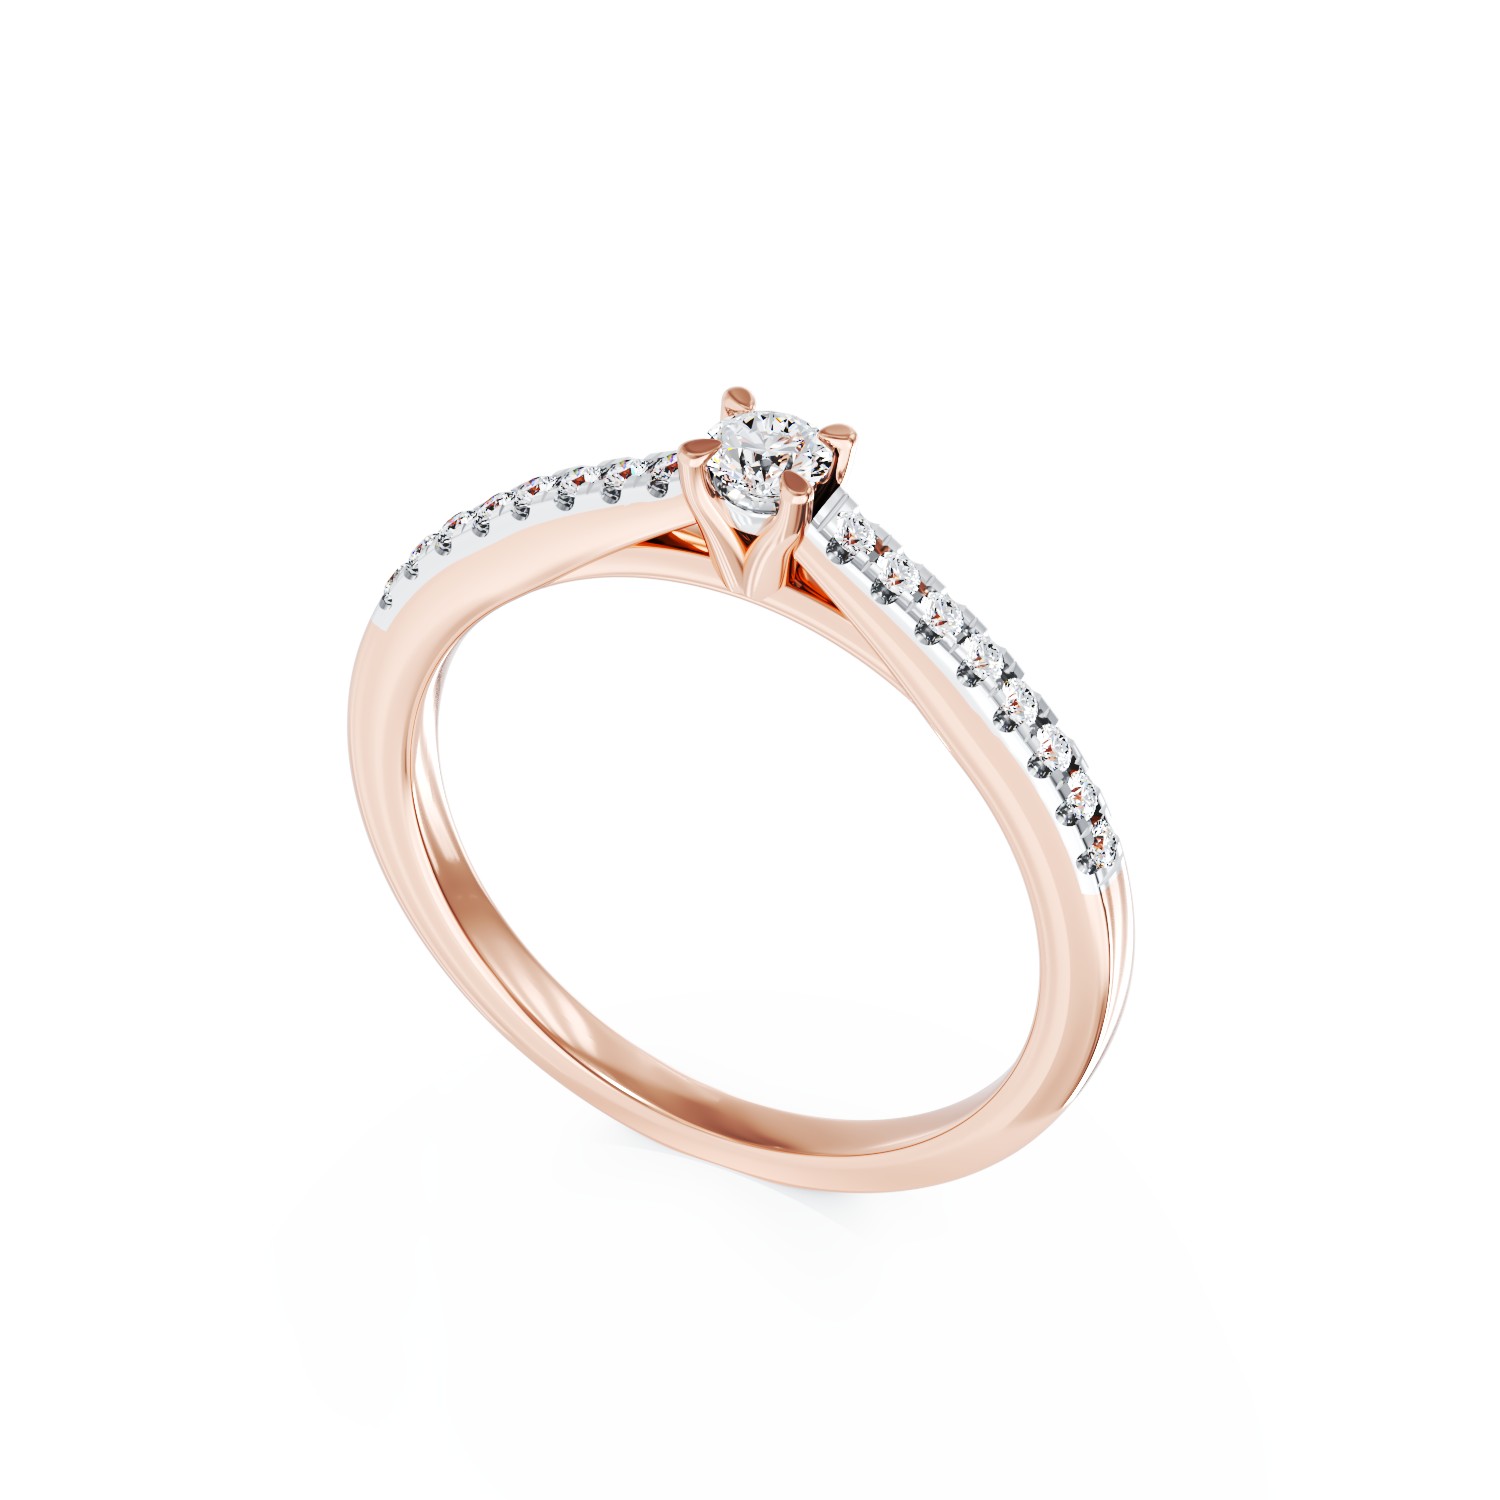 Rose gold engagement ring with 0.2ct diamonds